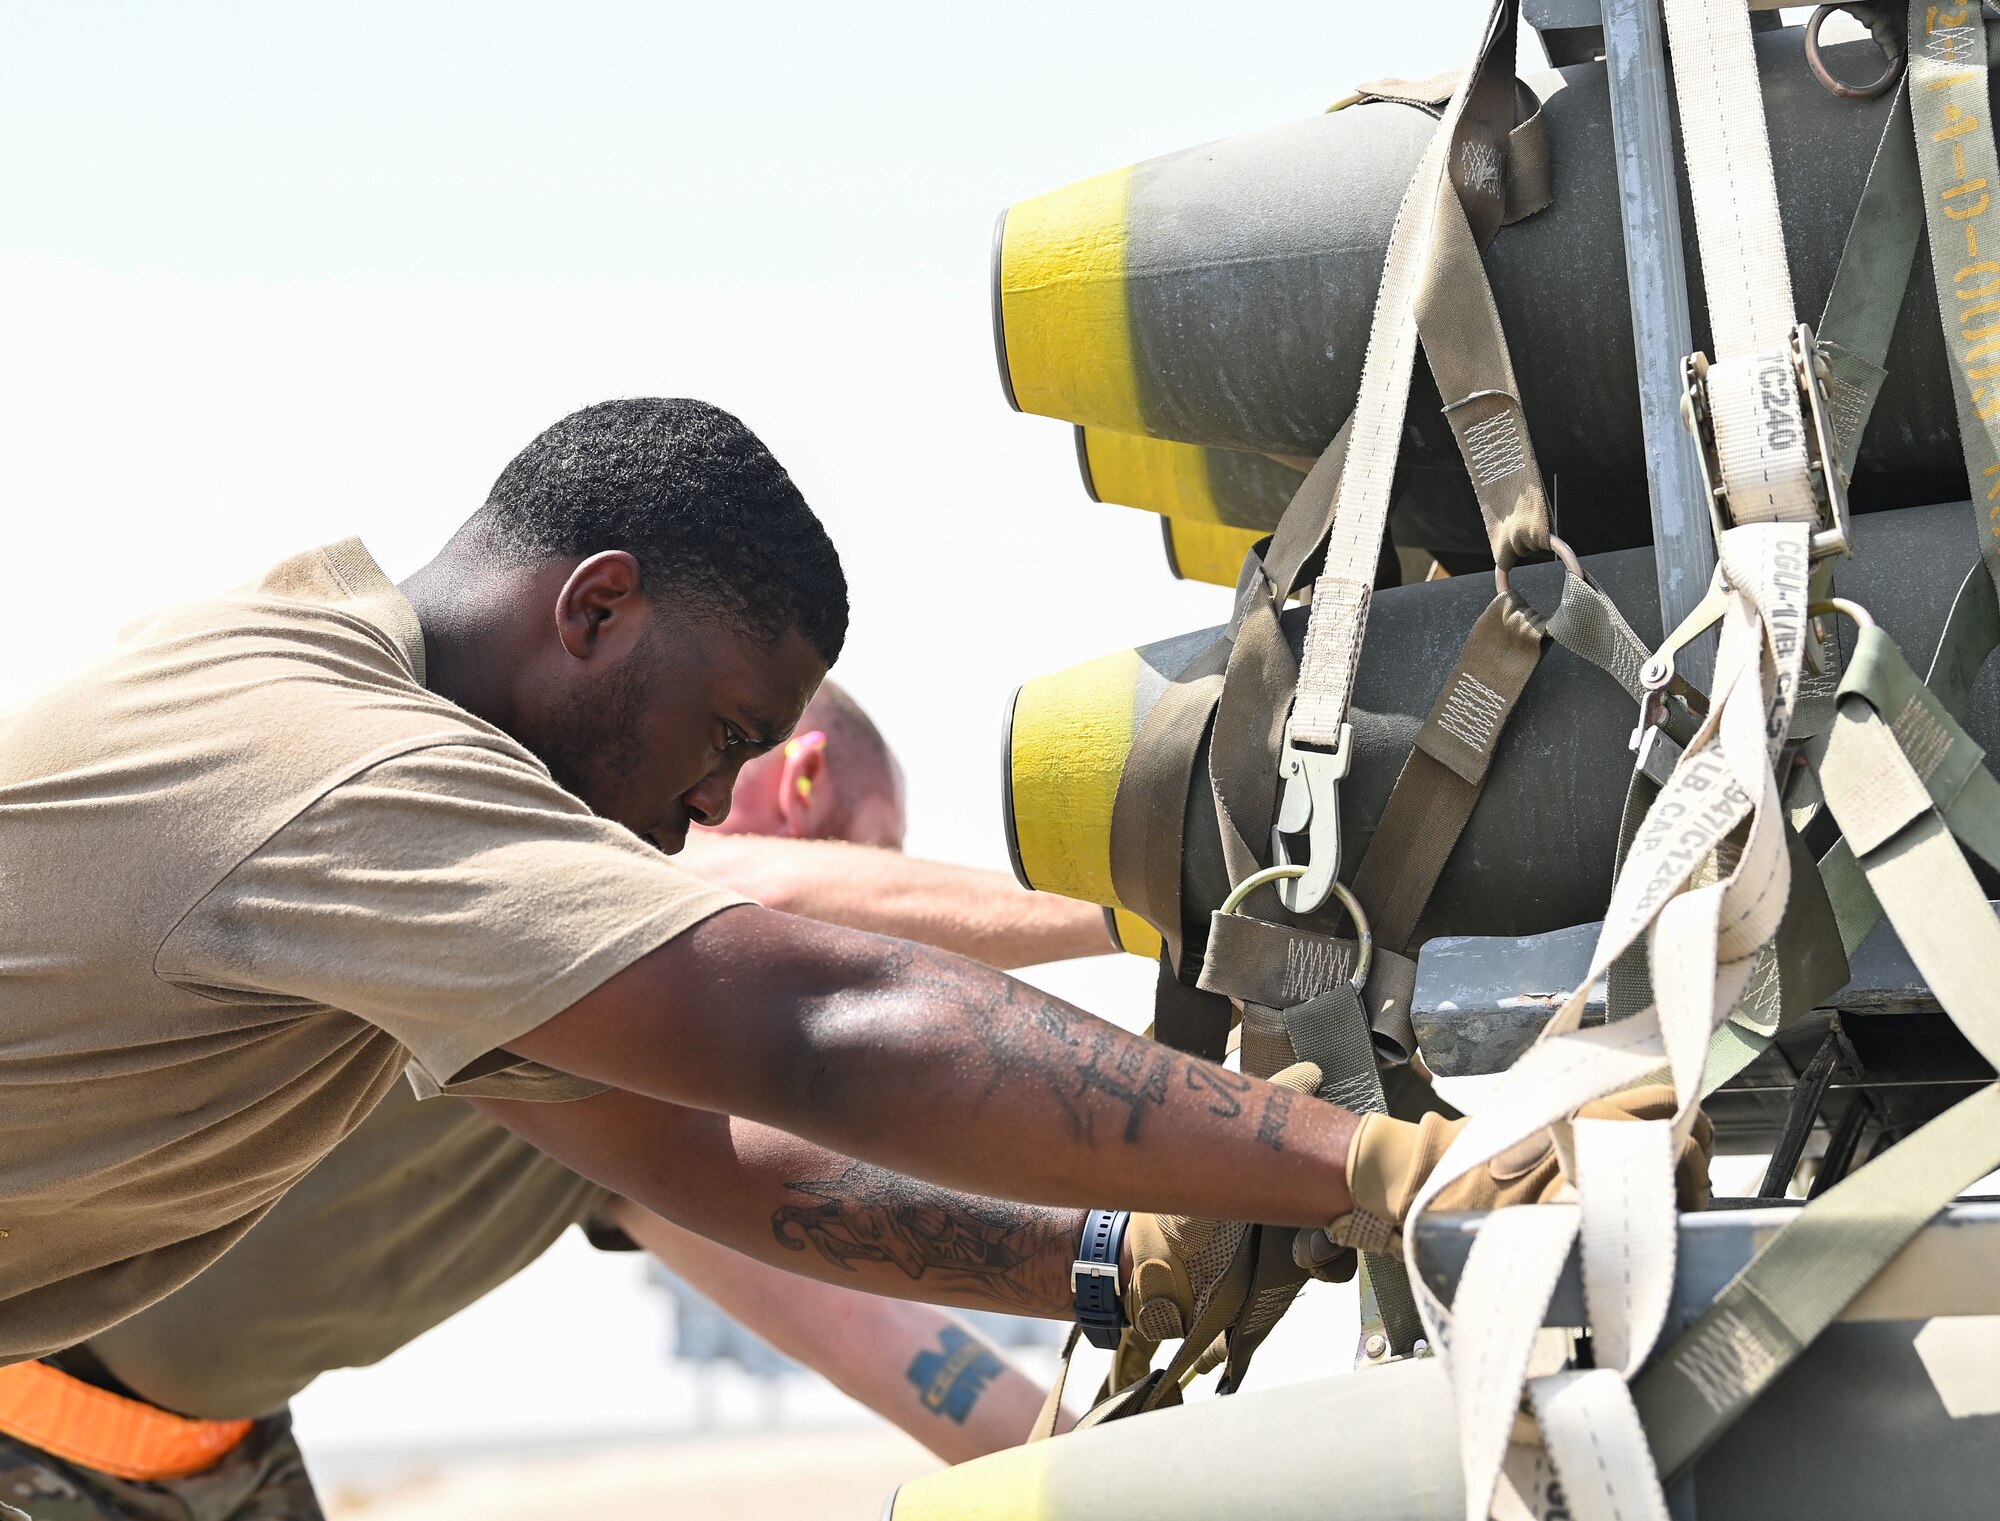 U.S. Air Force Airman 1st Class Nathaniel Battle, 379th Expeditionary Readiness Squadron Ground Transportation, pushes a pallet of munitions onto a K-loader Sept. 20, 2022 at Al Udeid Air Base, Qatar.  The 379th ERLS ground transport team moved munitions from the munitions storage area to a staging area where they were later loaded onto a C-17 Globemaster III aircraft. (U.S. Air National Guard photo by Master Sgt. Michael J. Kelly)